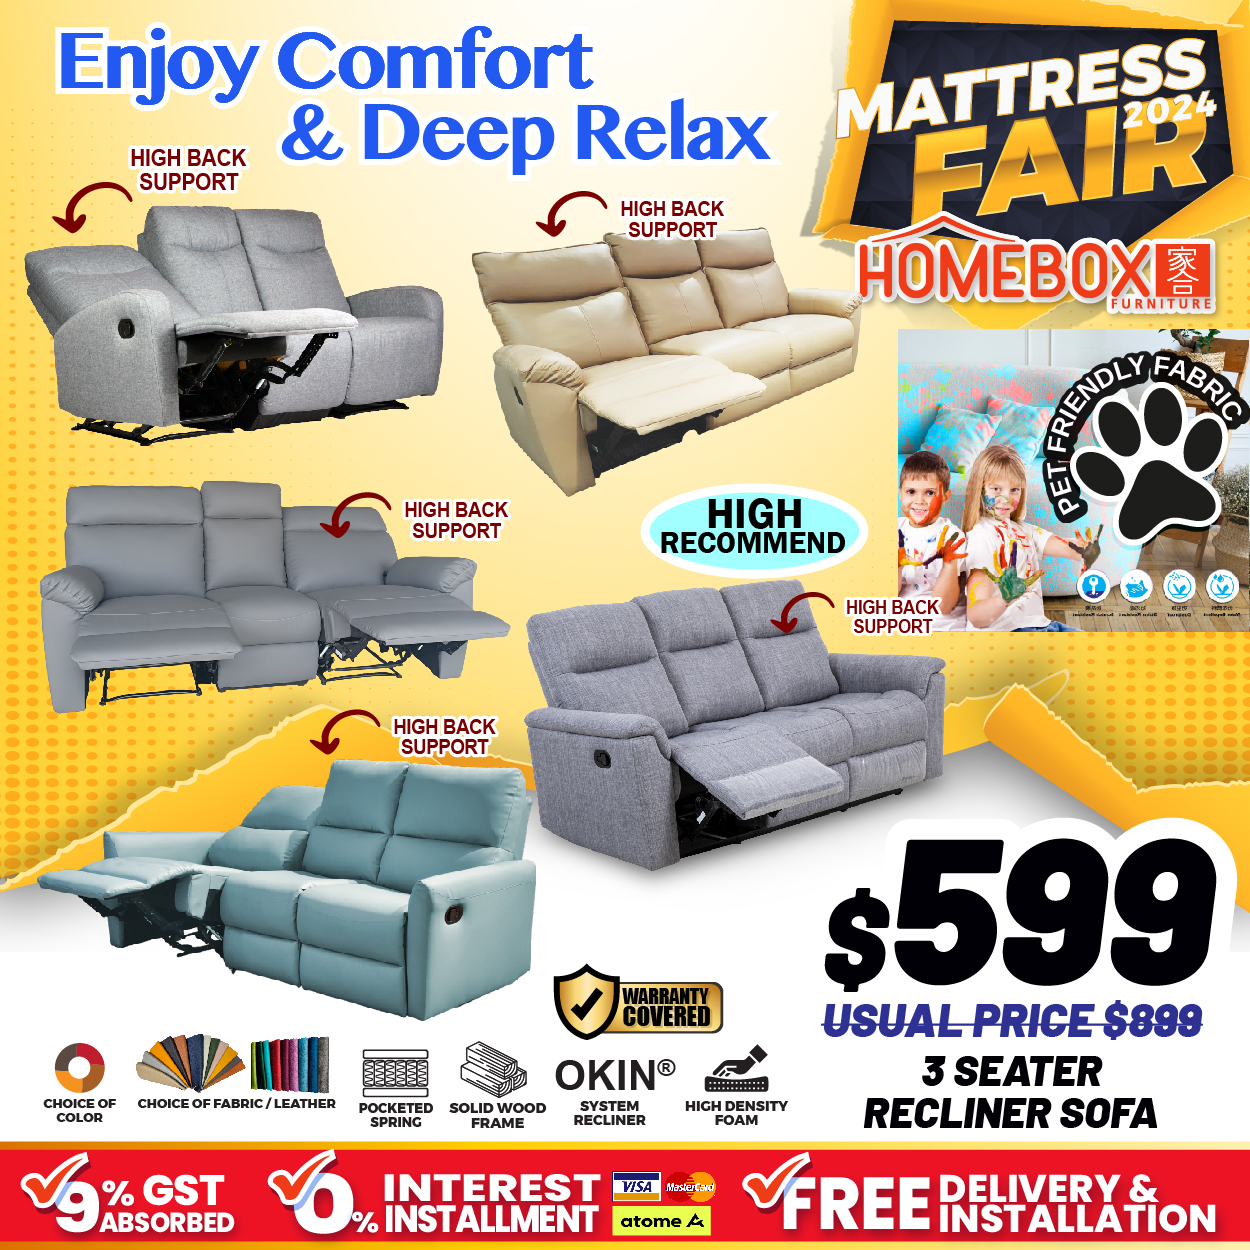 Lobang: Homebox's Biggest Mattress Fair in Aljunied Has Everything At Up To 80% Off From Now Till 5 May 24. Get A Free Mattres Upgrade During The Sale! - 19